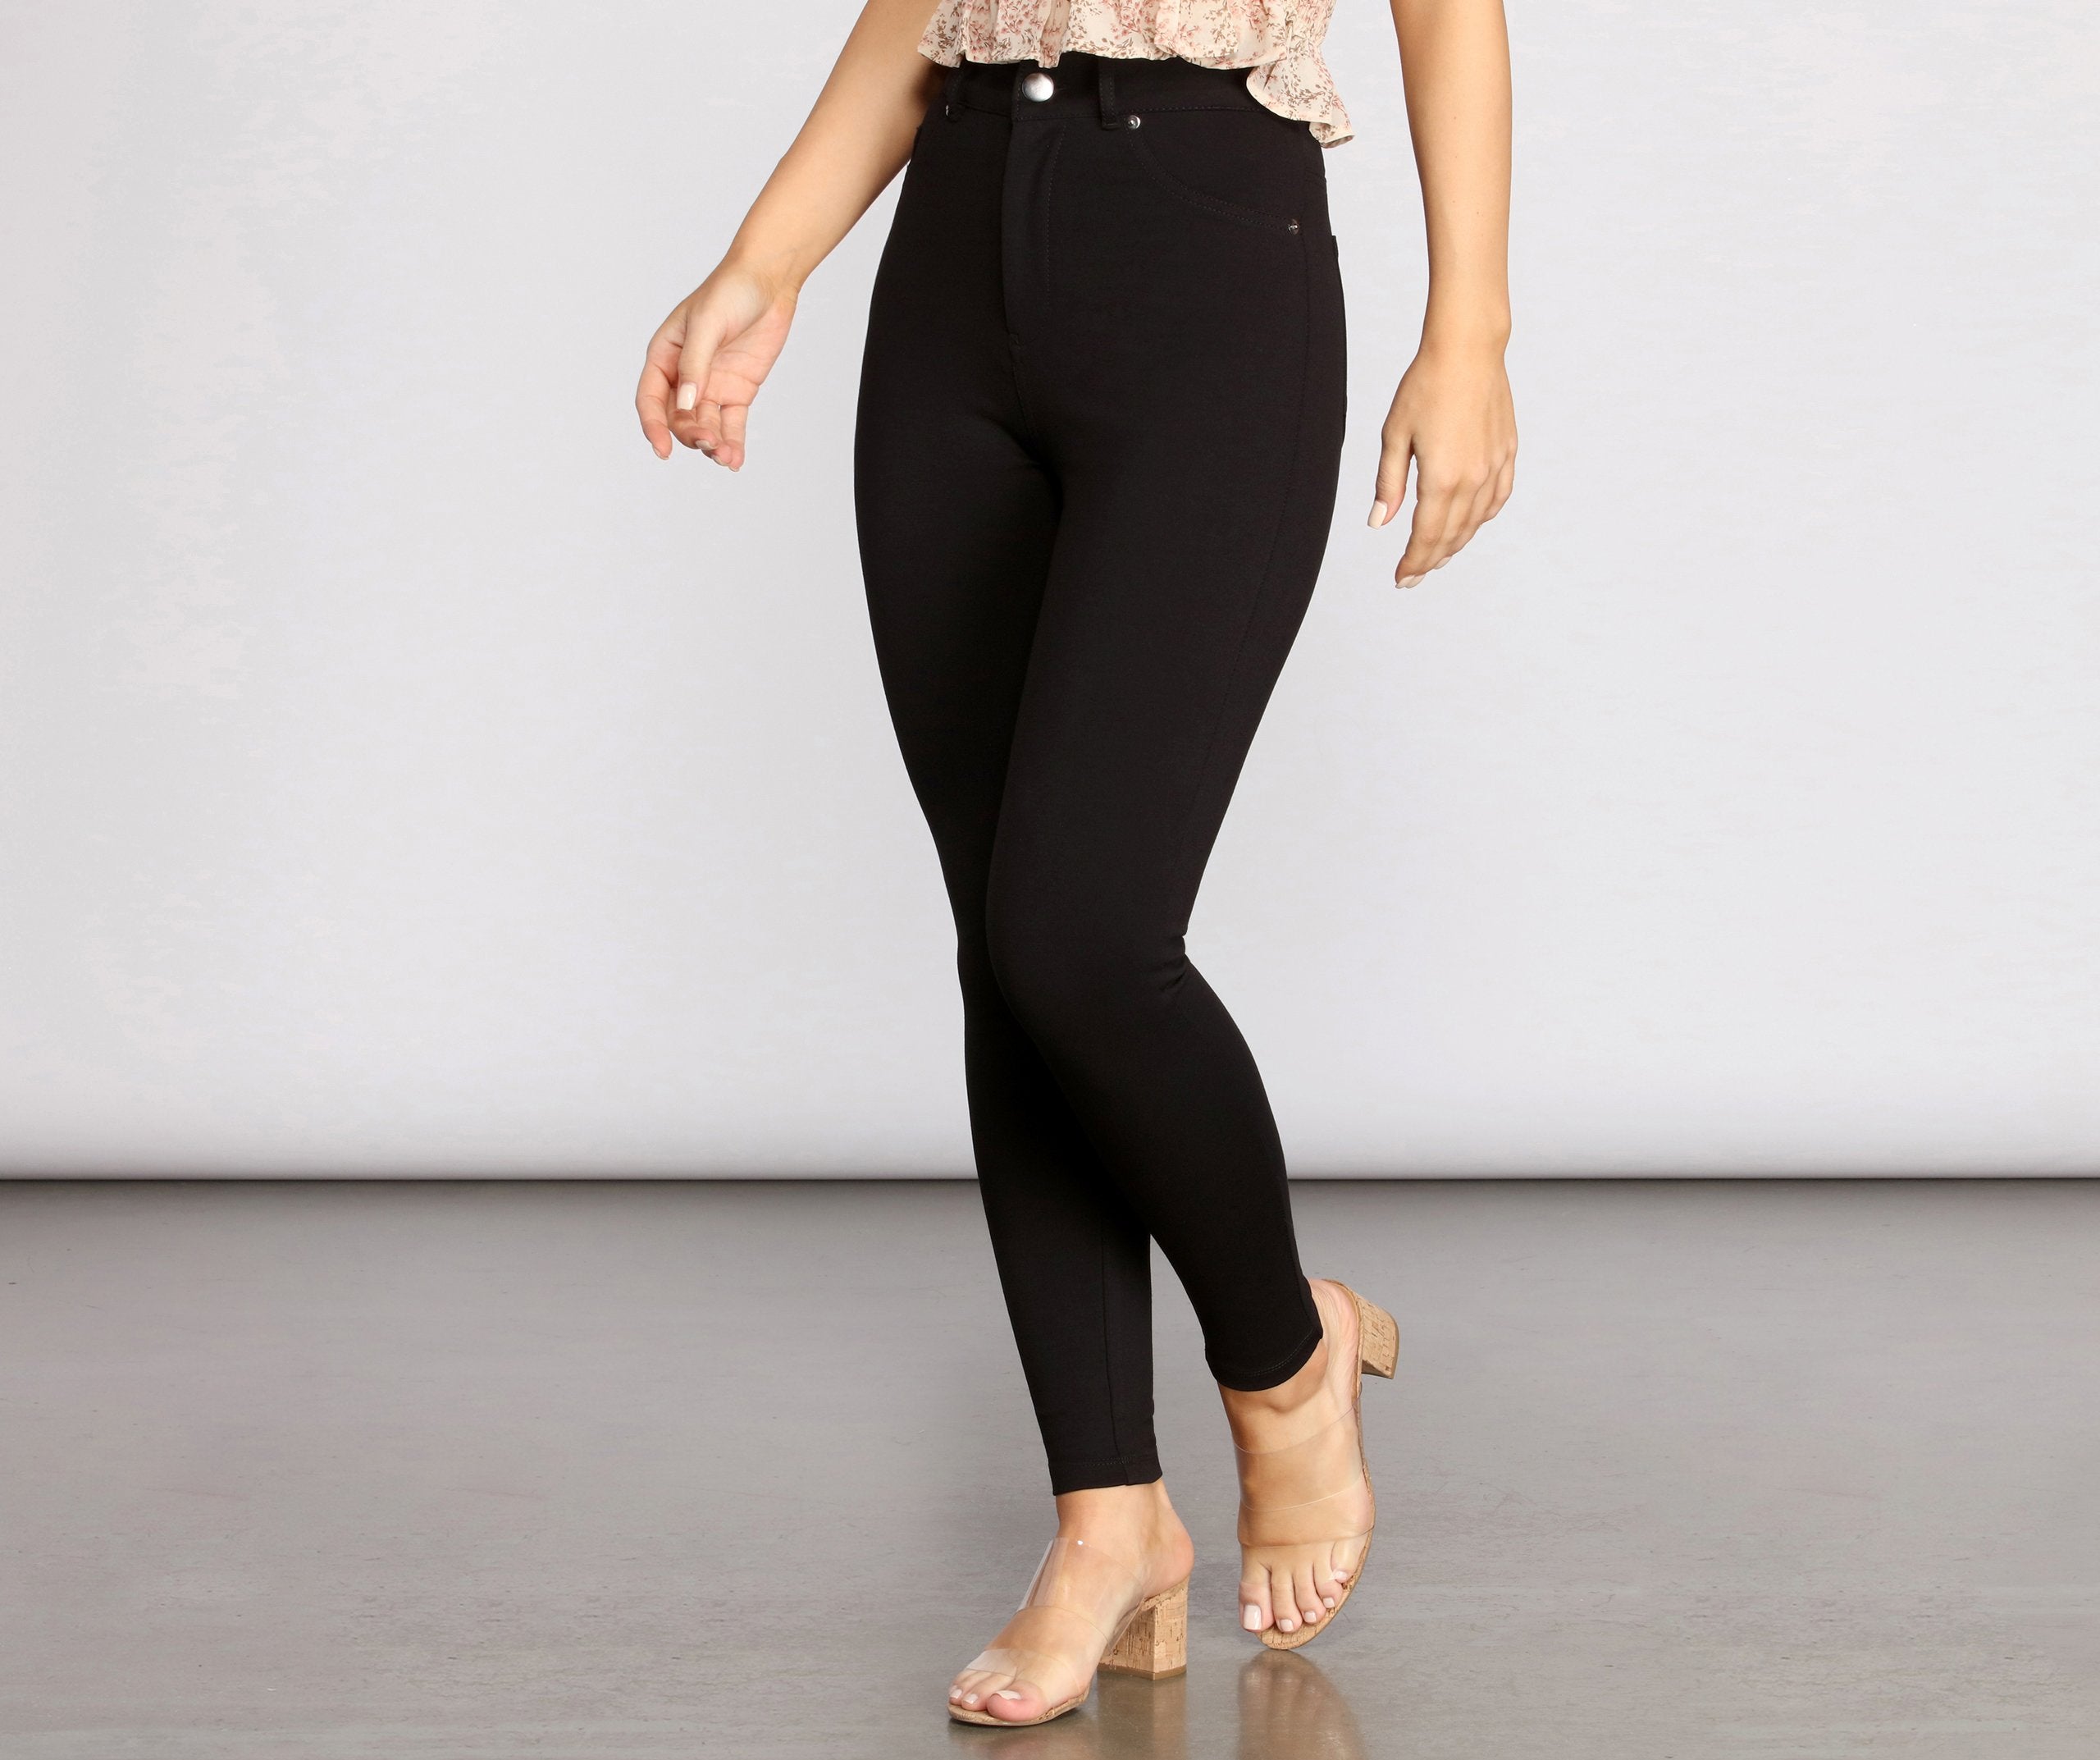 Super High Rise Skinny Ponte Pants - Lady Occasions